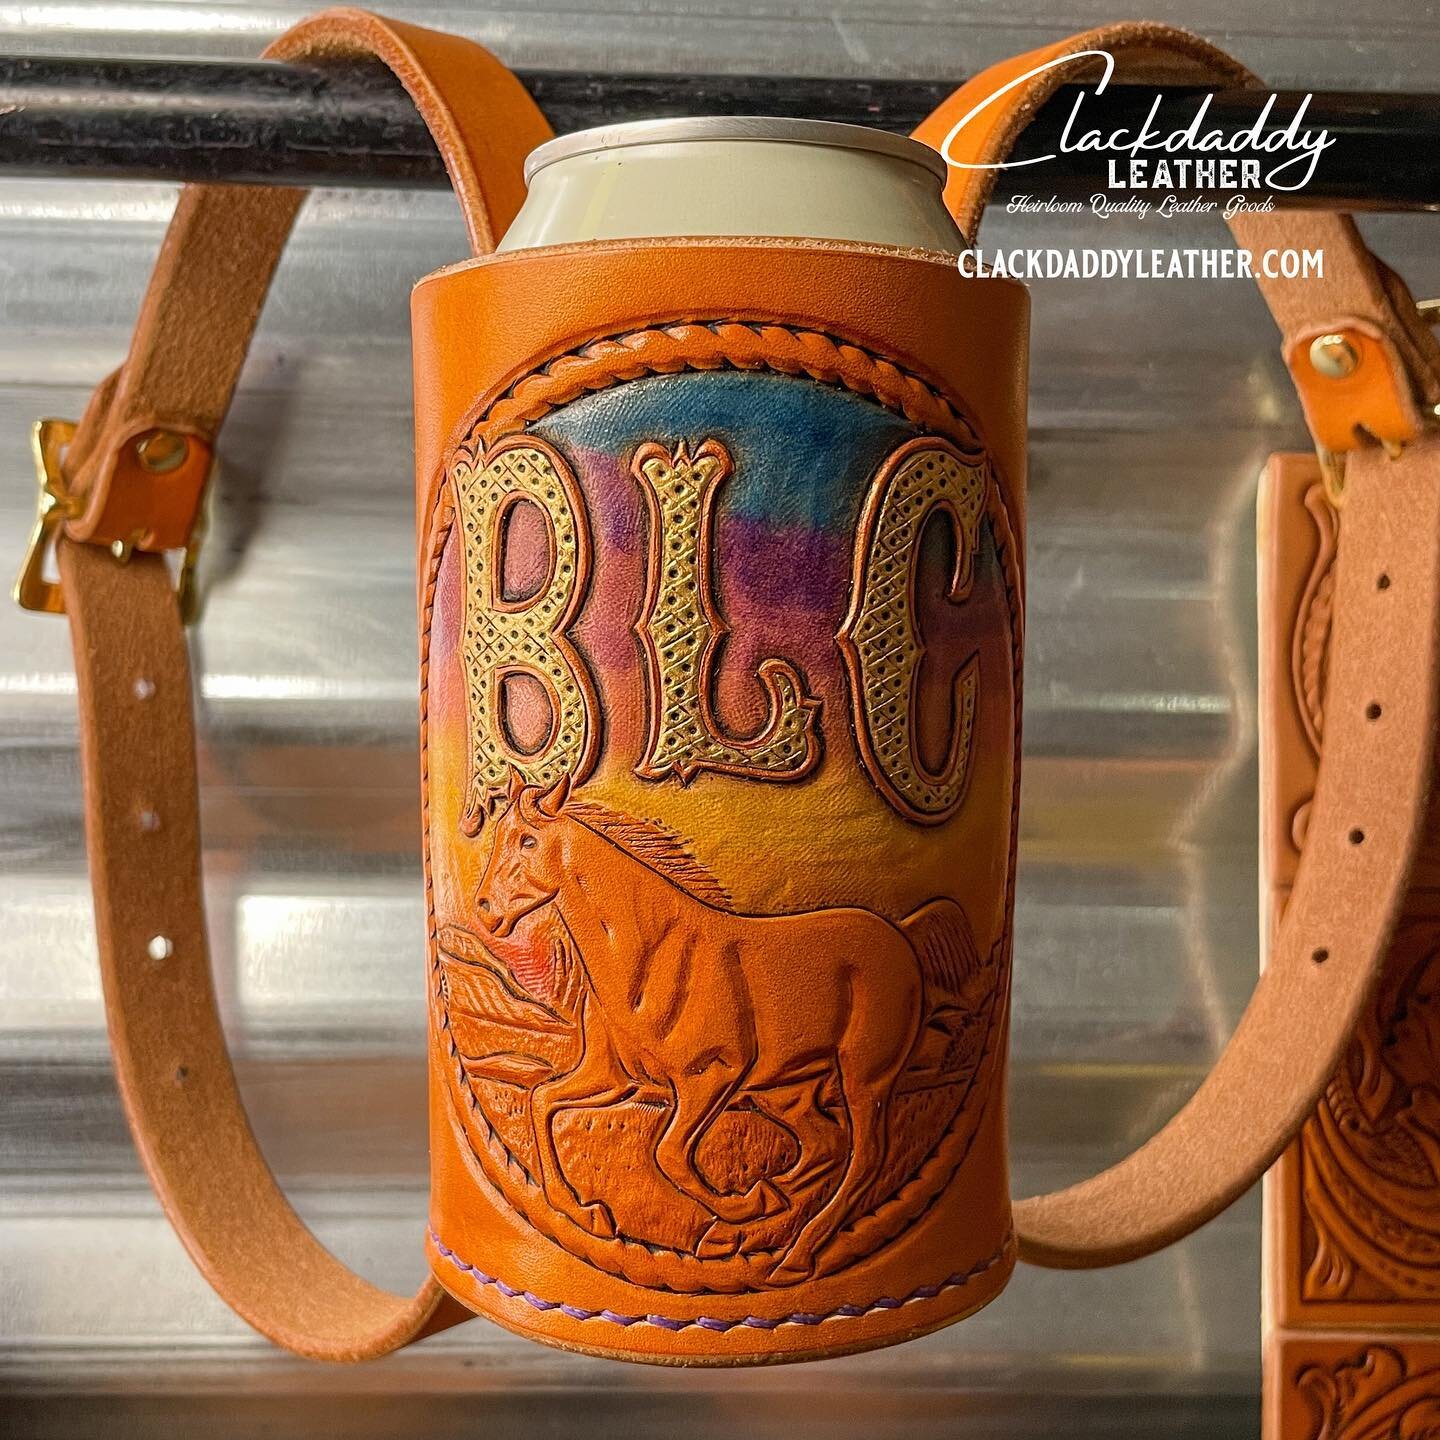 Who&rsquo;s ready for a trail ride? #saddlebeerholder #holdmybeer #horsetack #trailride #customleather #leatherwork #punchy #yeehaw #horses #horseart